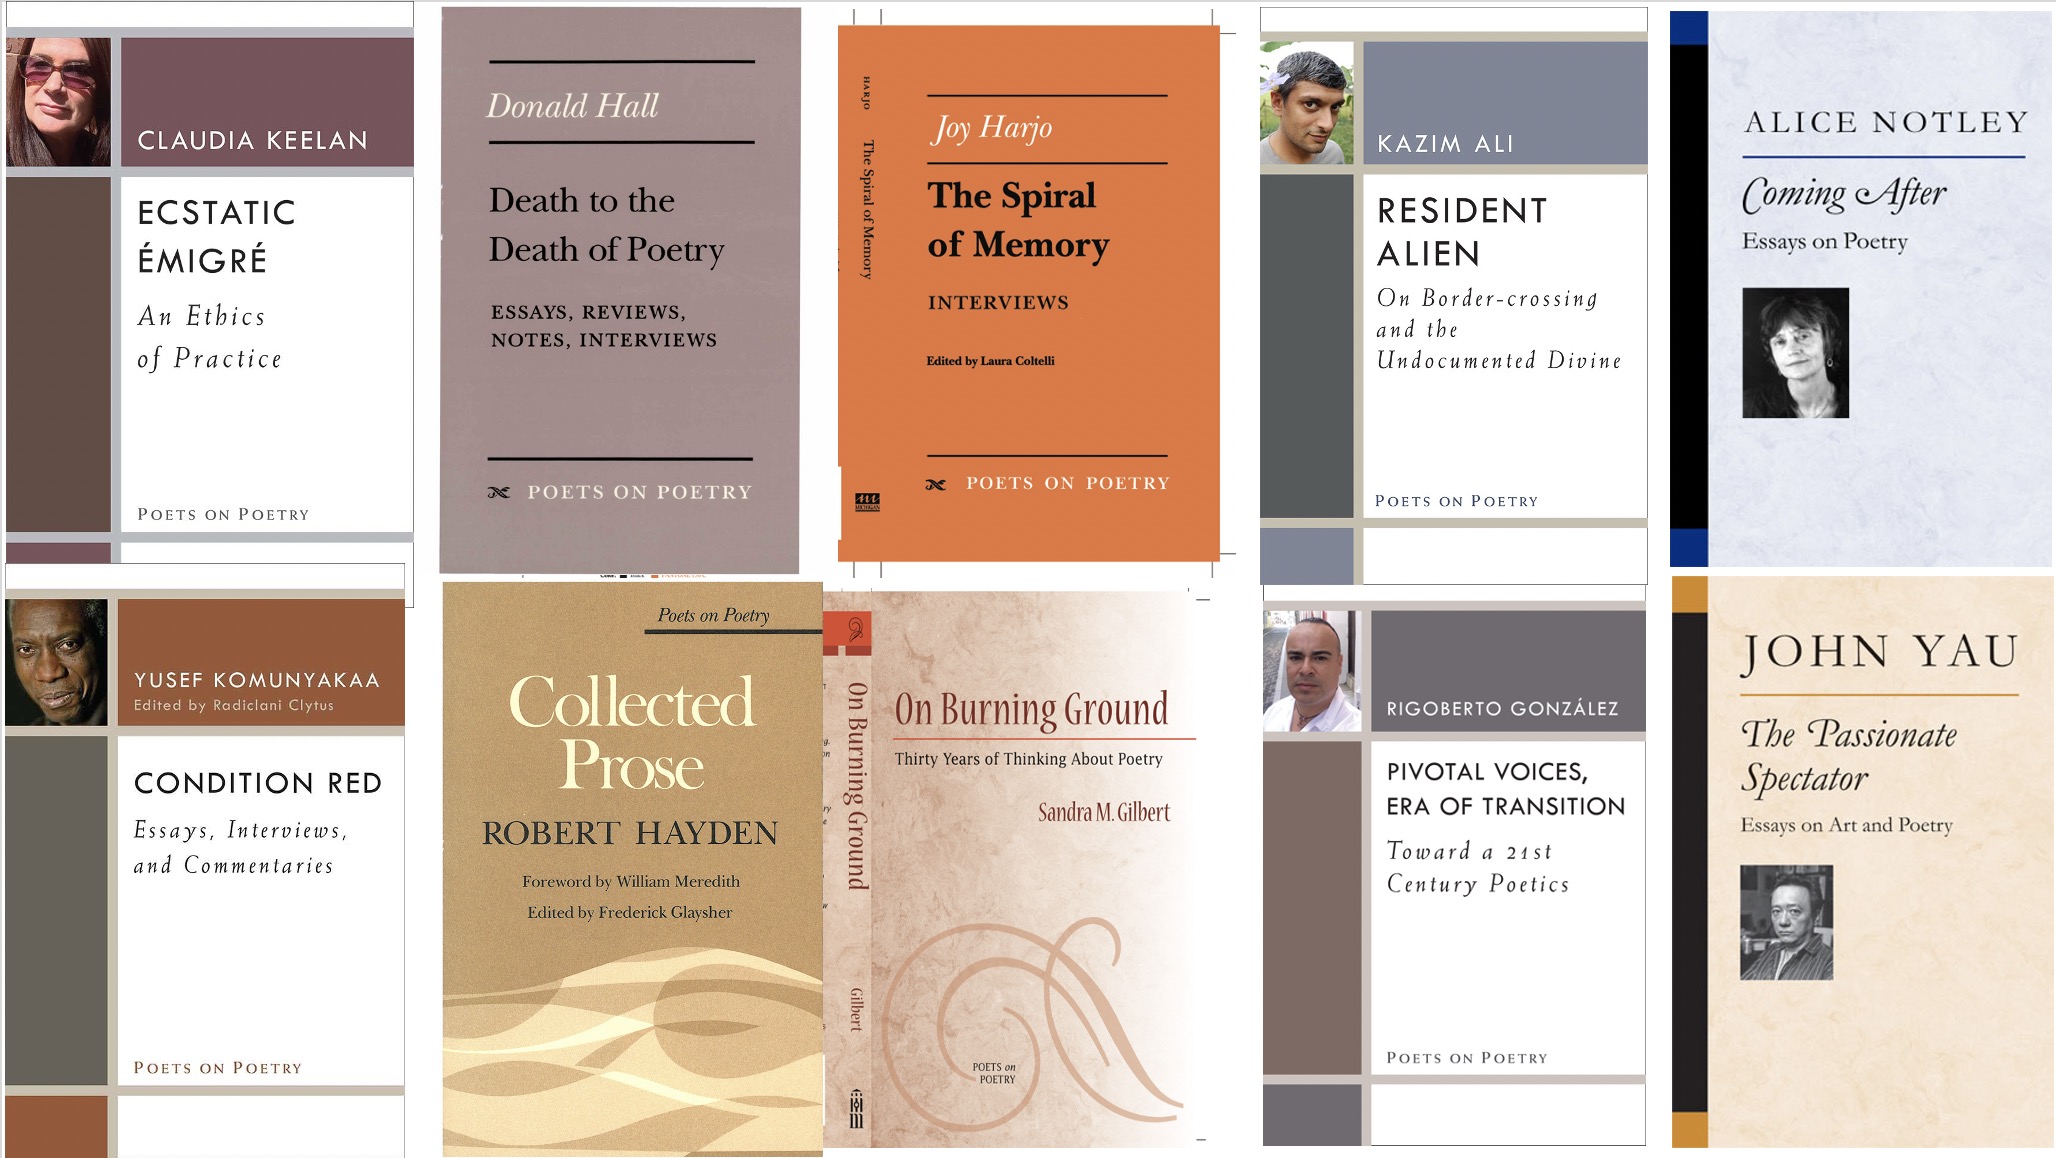 Collage of ten selected covers for the Poets on Poetry relaunch: (from top left to bottom right) Keelan, Hall, Harjo, Ashbery, Notley, Komunyakaa, Hayden, Gilbert, Gonzalez, Yau